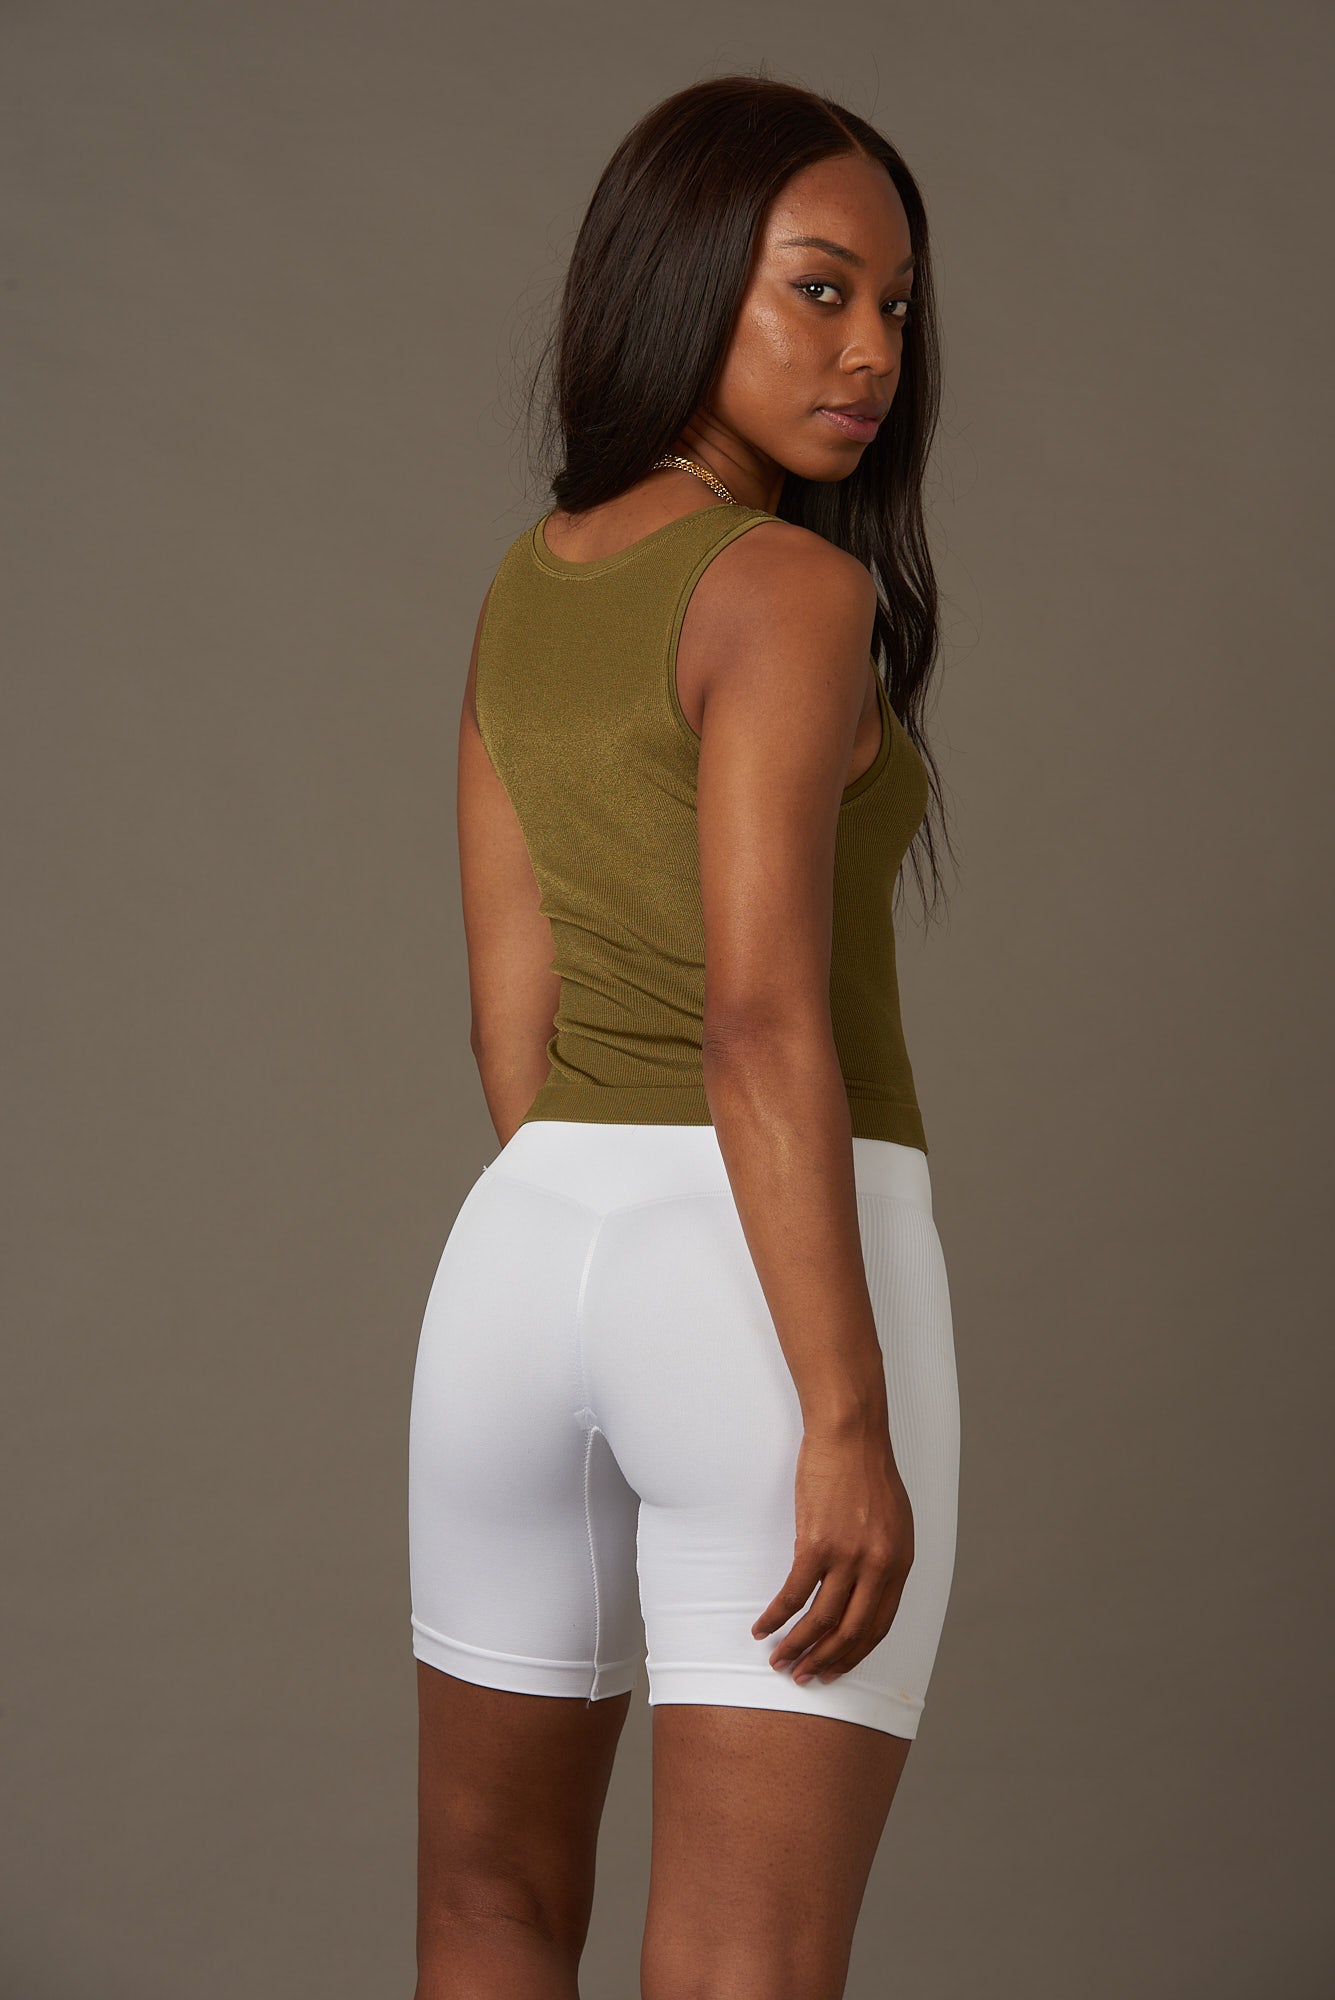 Gleam Top in Olive-Tops-Shop Clothing Sustainable Recycled Yoga Leggings Women On-line Barcelona Believe Athletics Sustainable Recycled Yoga Clothes